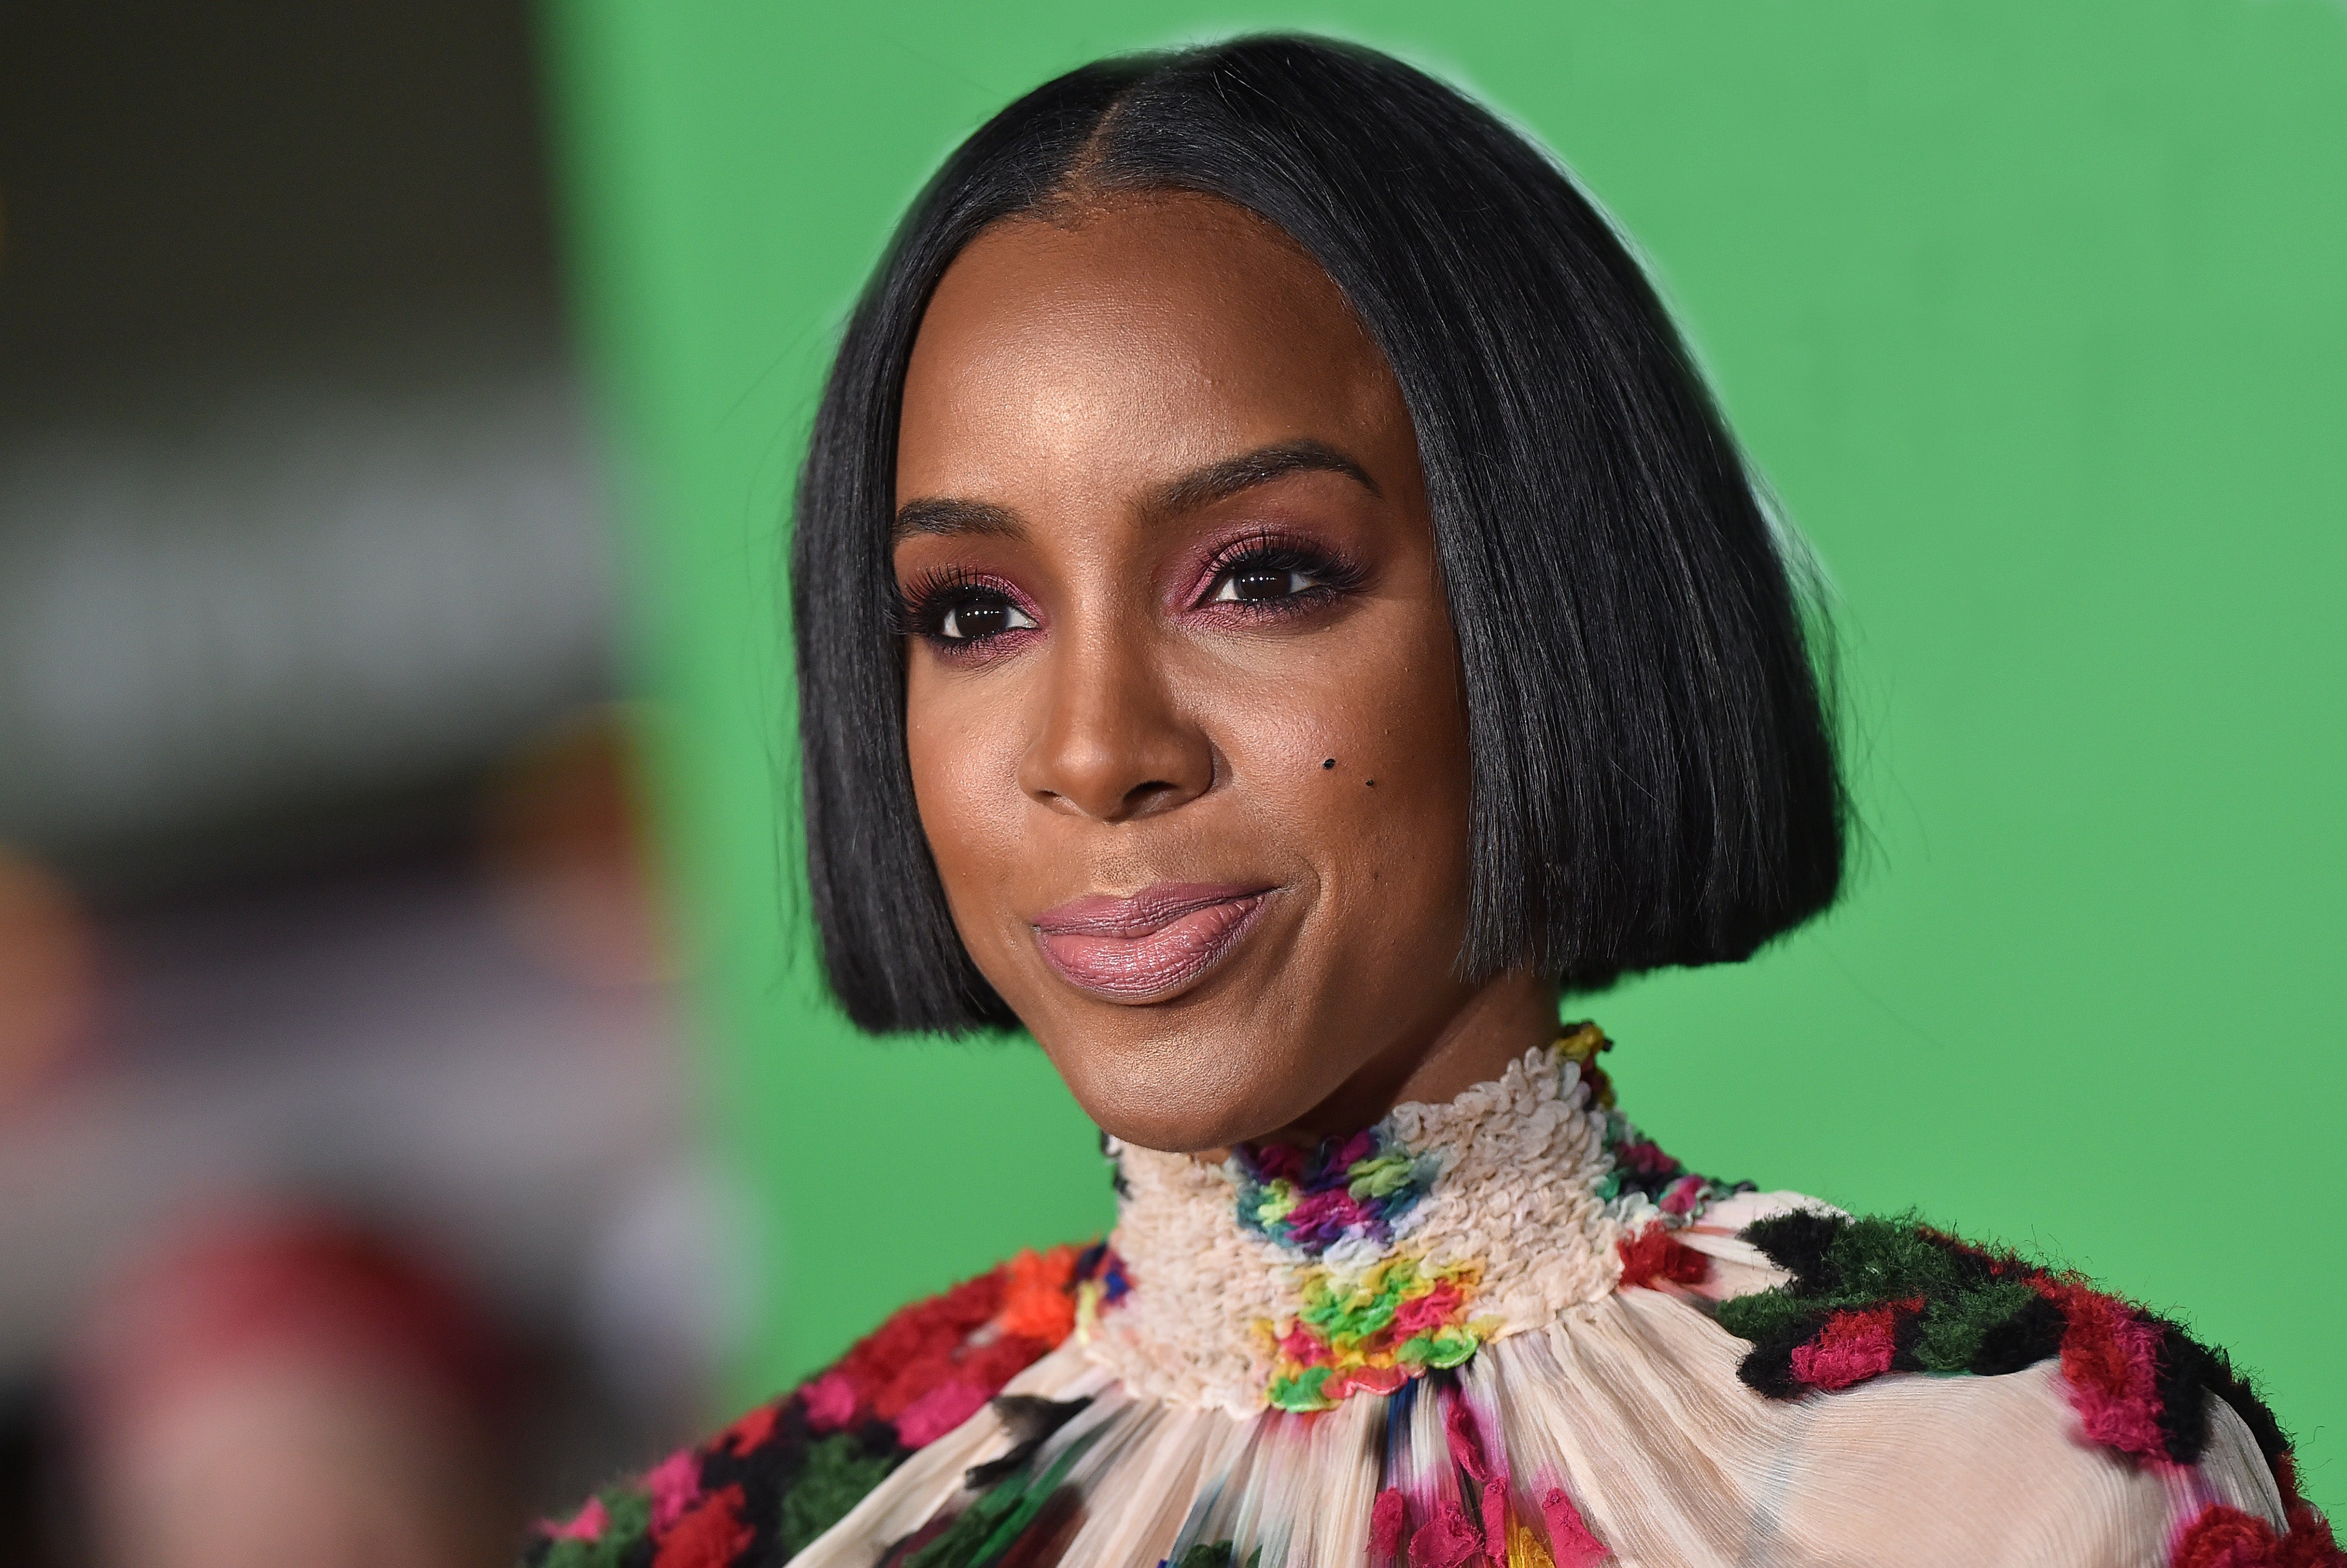 Keep Calm: Kelly Rowland's Latest Book 'Whoa Baby!' Will Keep New Mothers From Freaking Out
